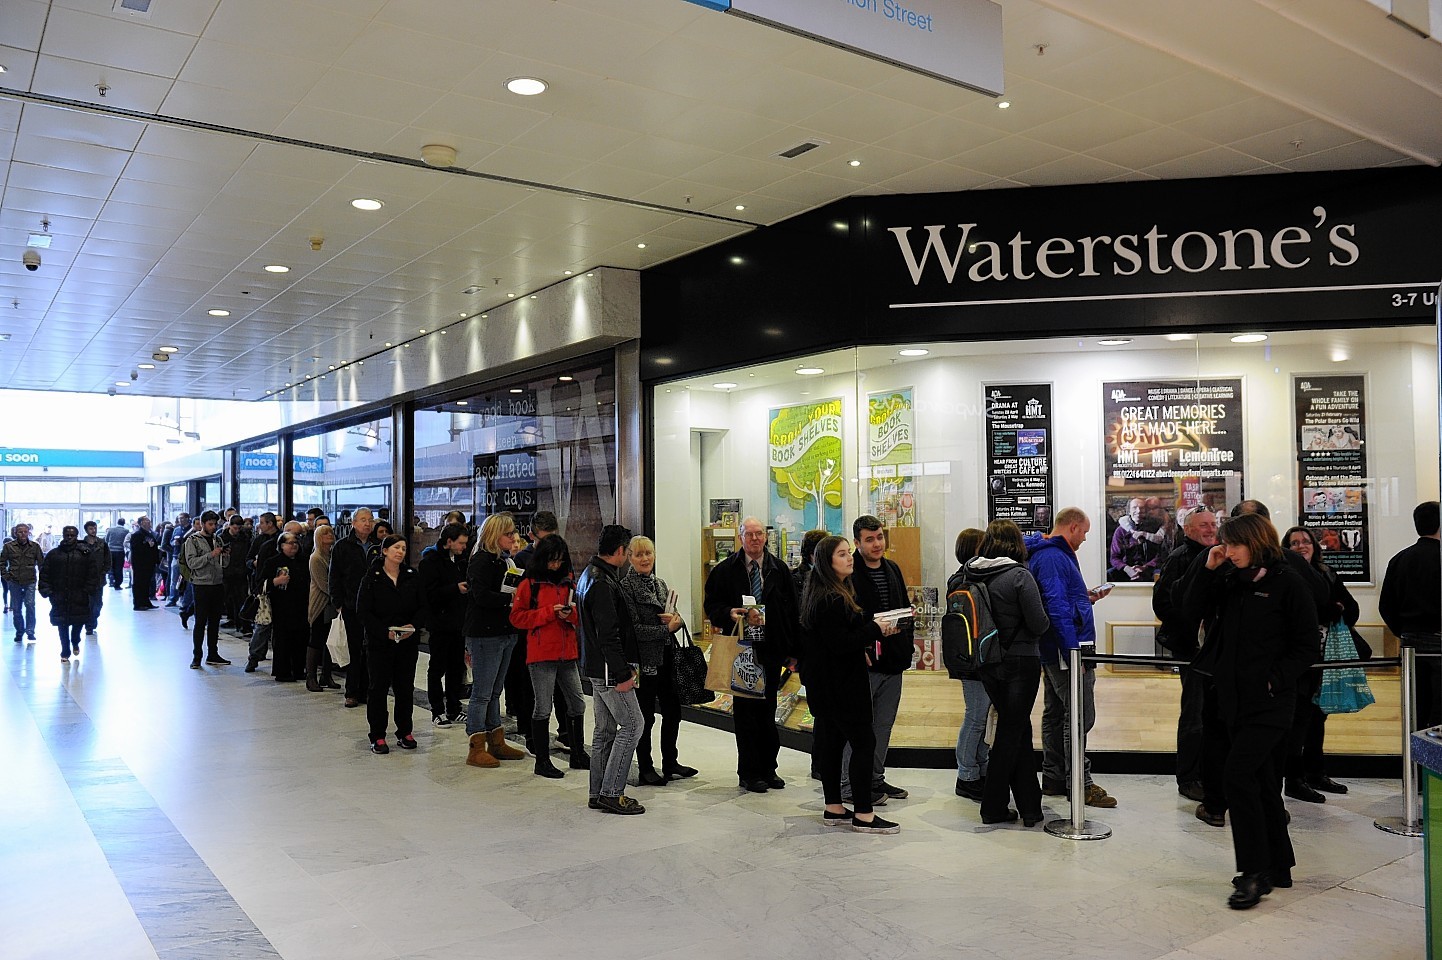 Supporters queued round the corner and beyond at Waterstones in Aberdeen